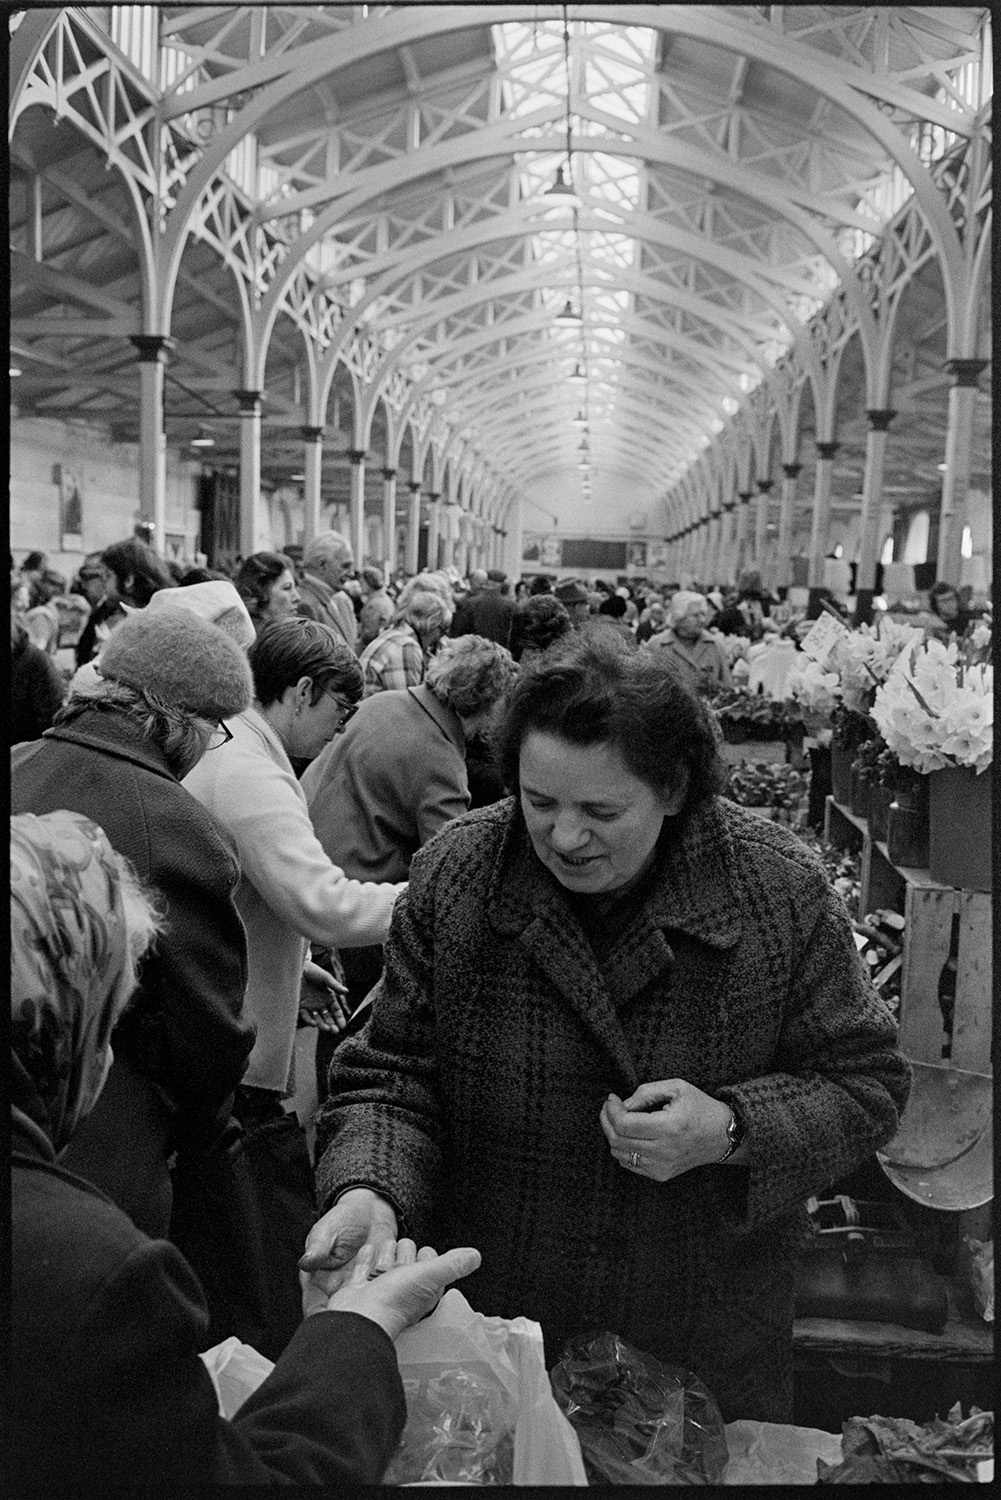 Stalls at Pannier market, eggs, vegetables, flowers. 
[A woman buying goods from a stall at Barnstpale Pannier Market. Other stallholders and shoppers can be seen in the background, as well as buckets of flowers for sale on one of the stalls.]